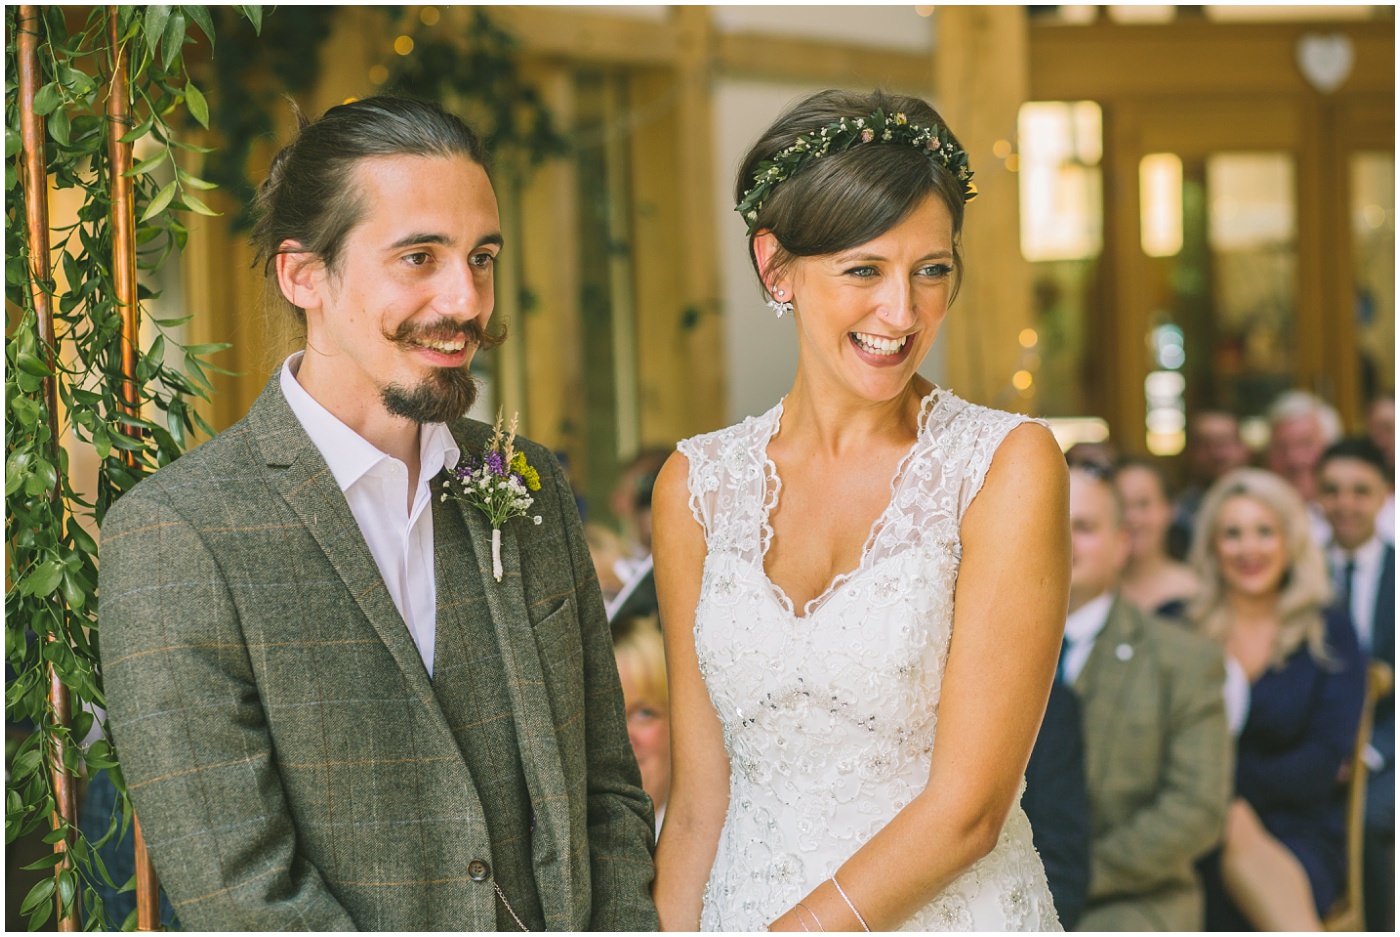 Bride and Groom smile during ceremony at the oaktree of peover